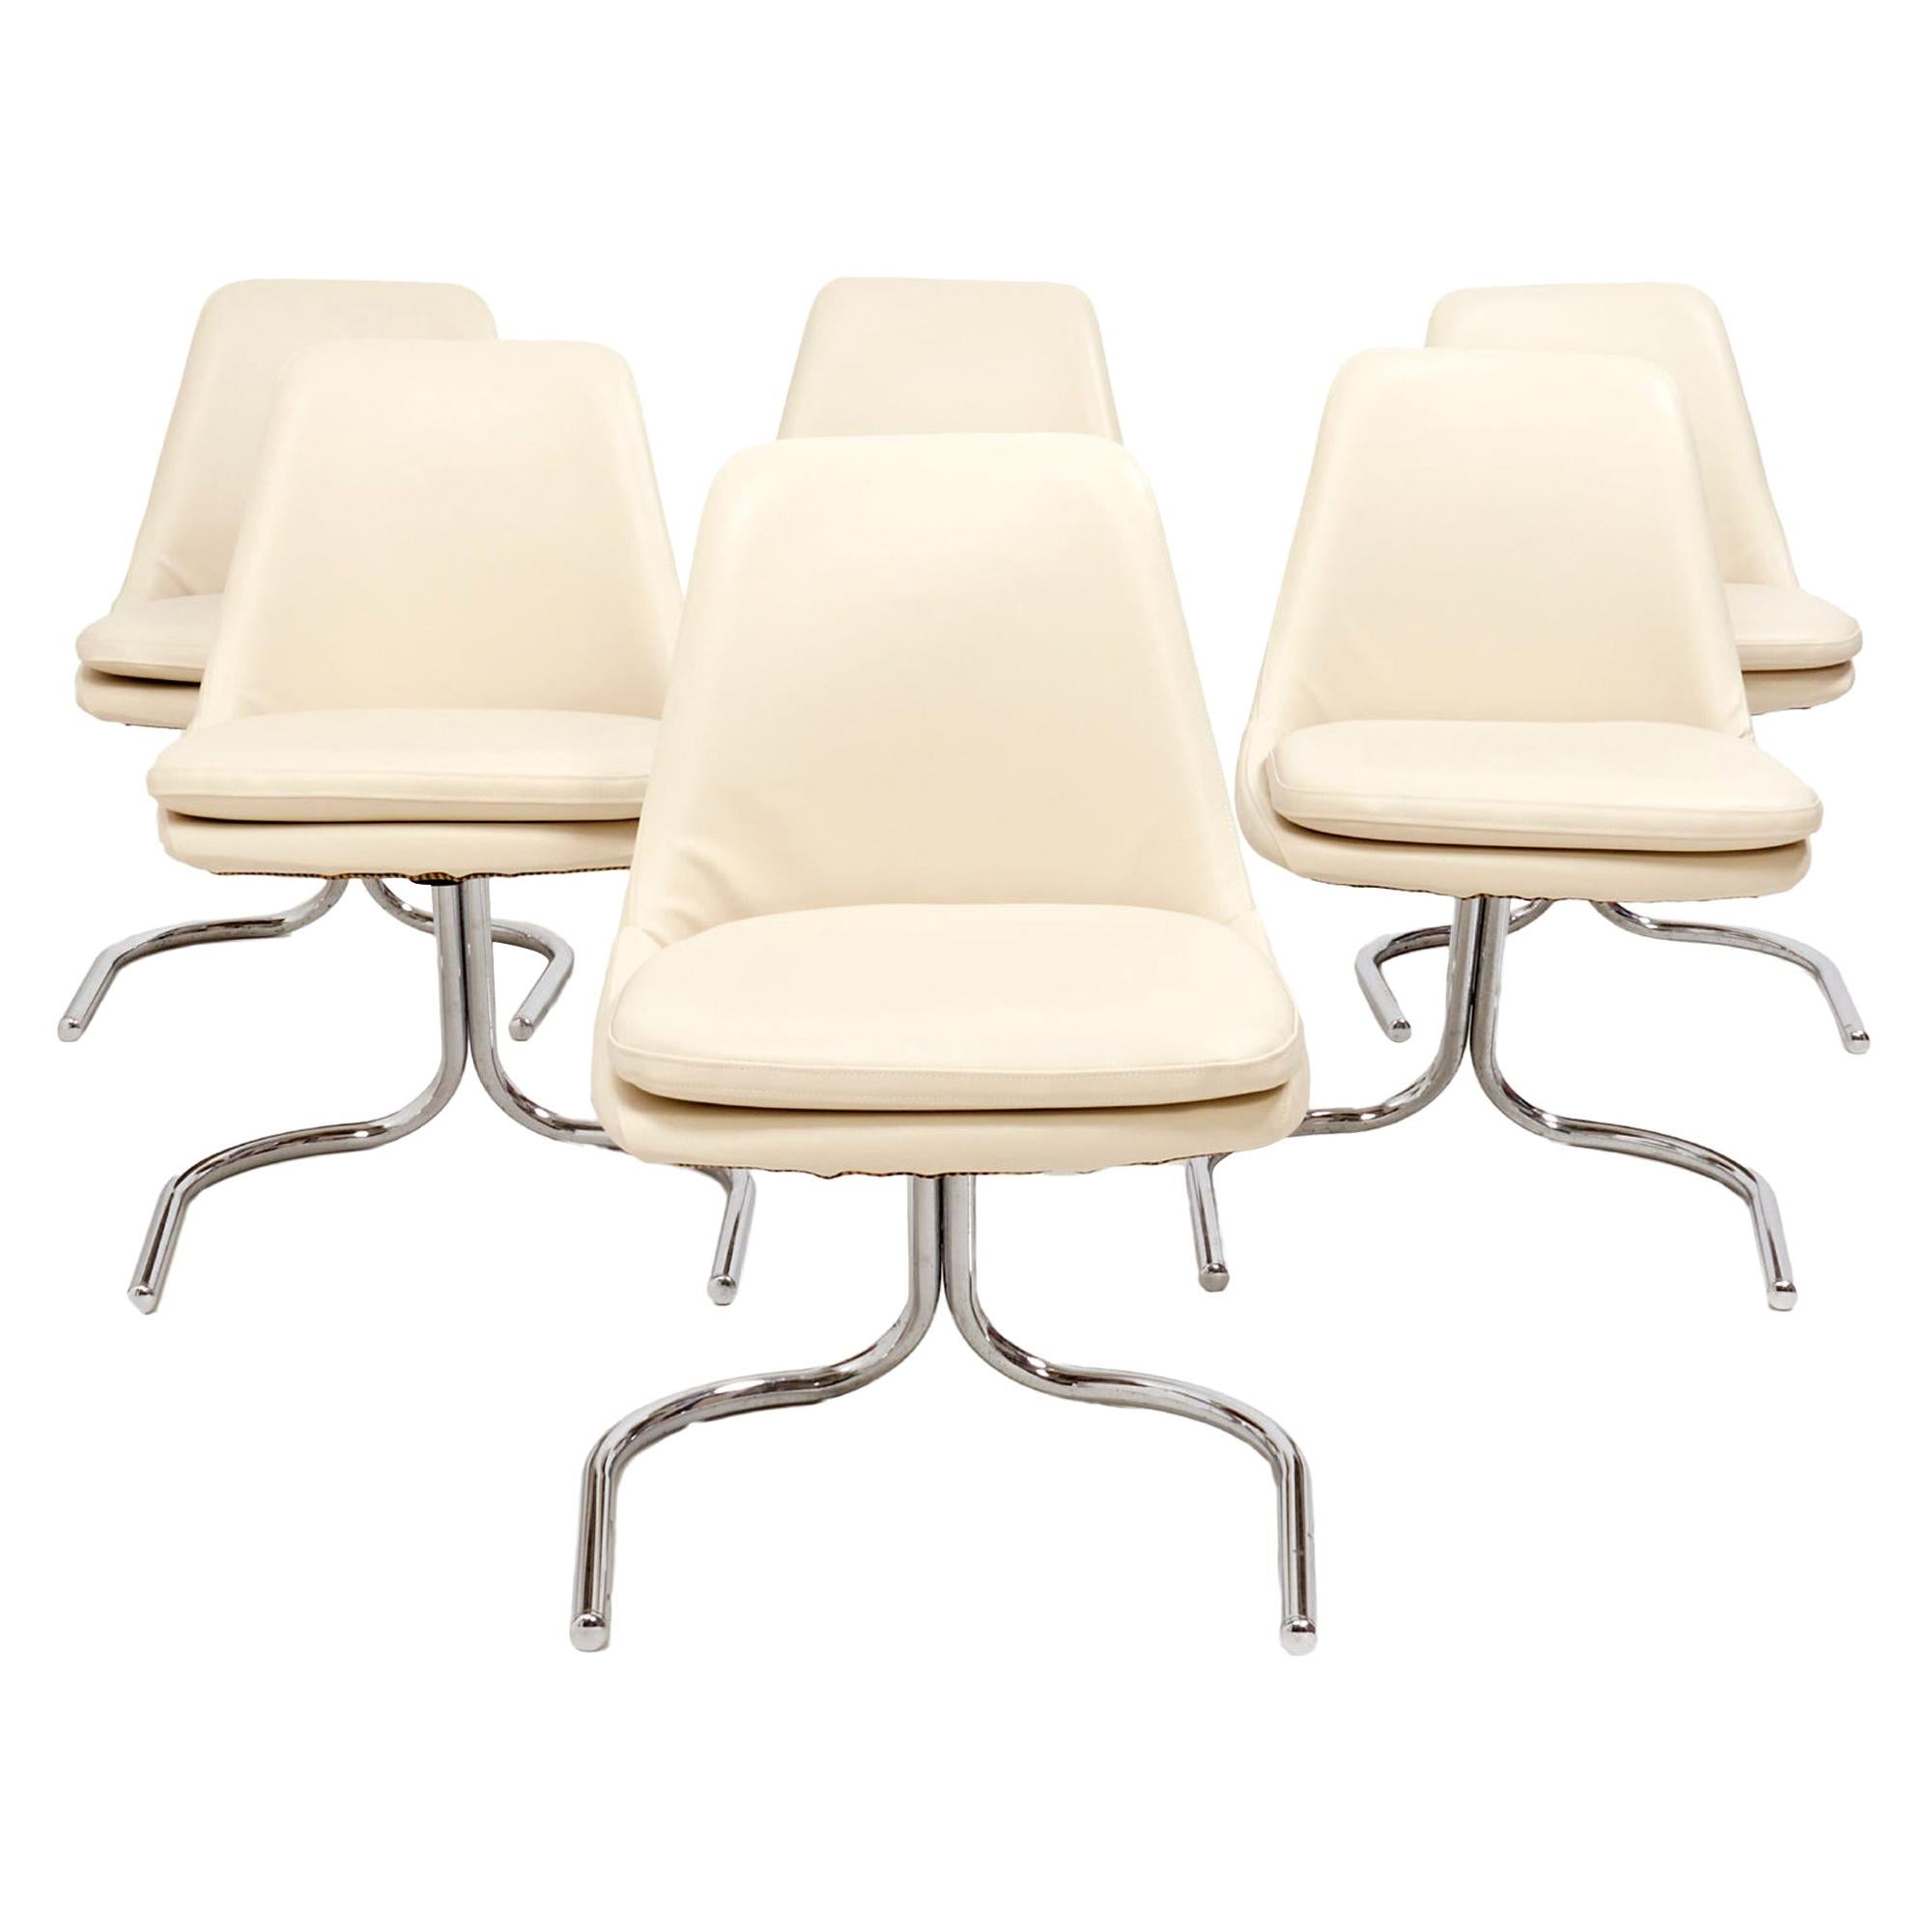 1970s Vintage Chrome Cantilever Dining Chairs, Set of 6